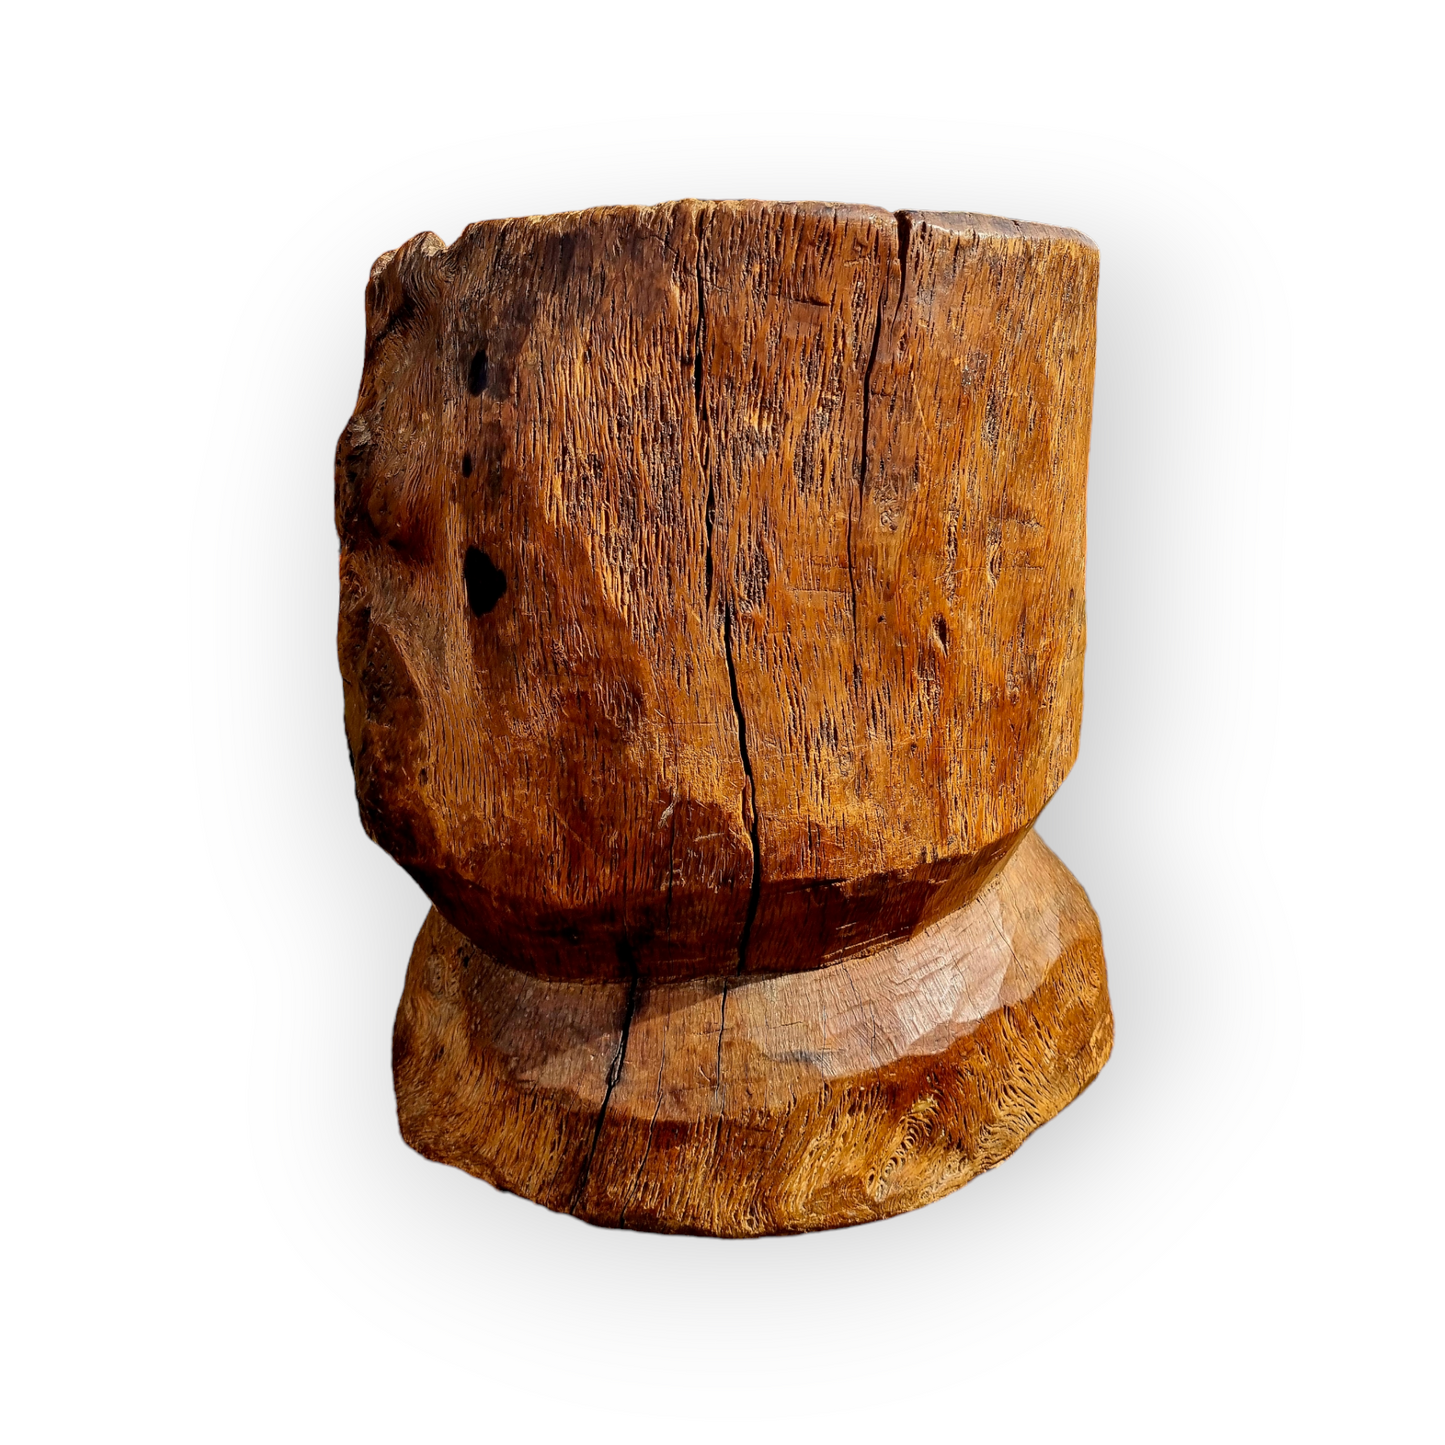 An Incredibly Large 18th Century English Antique Burr Oak Dug-Out Mortar & Pestle, The Mortar Standing 33 cm (13") High